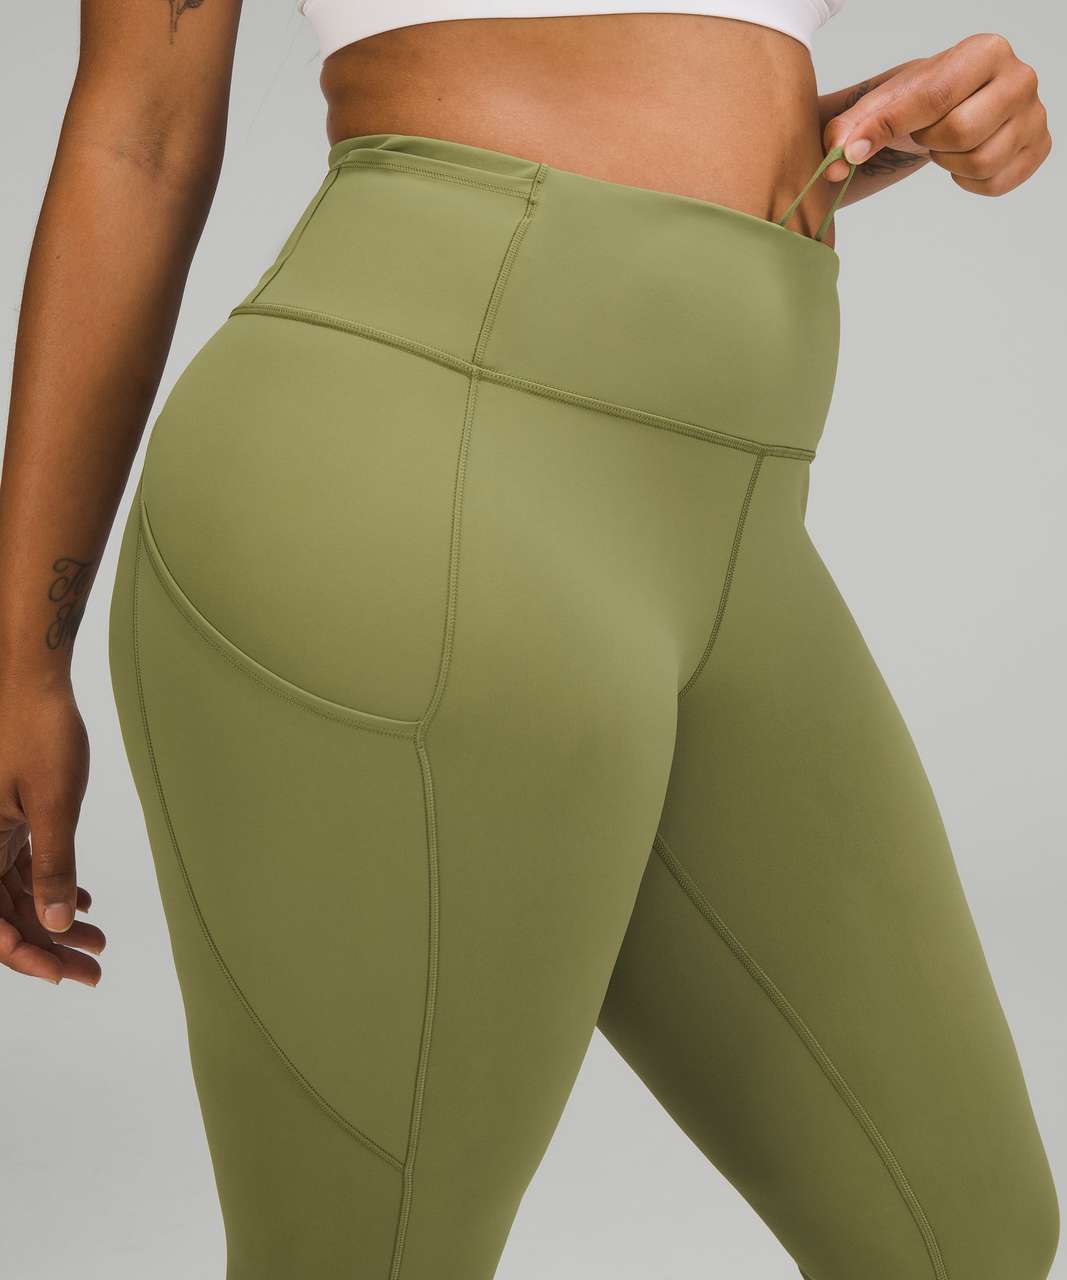 Lululemon Fast and Free High-Rise Crop 23" - Bronze Green